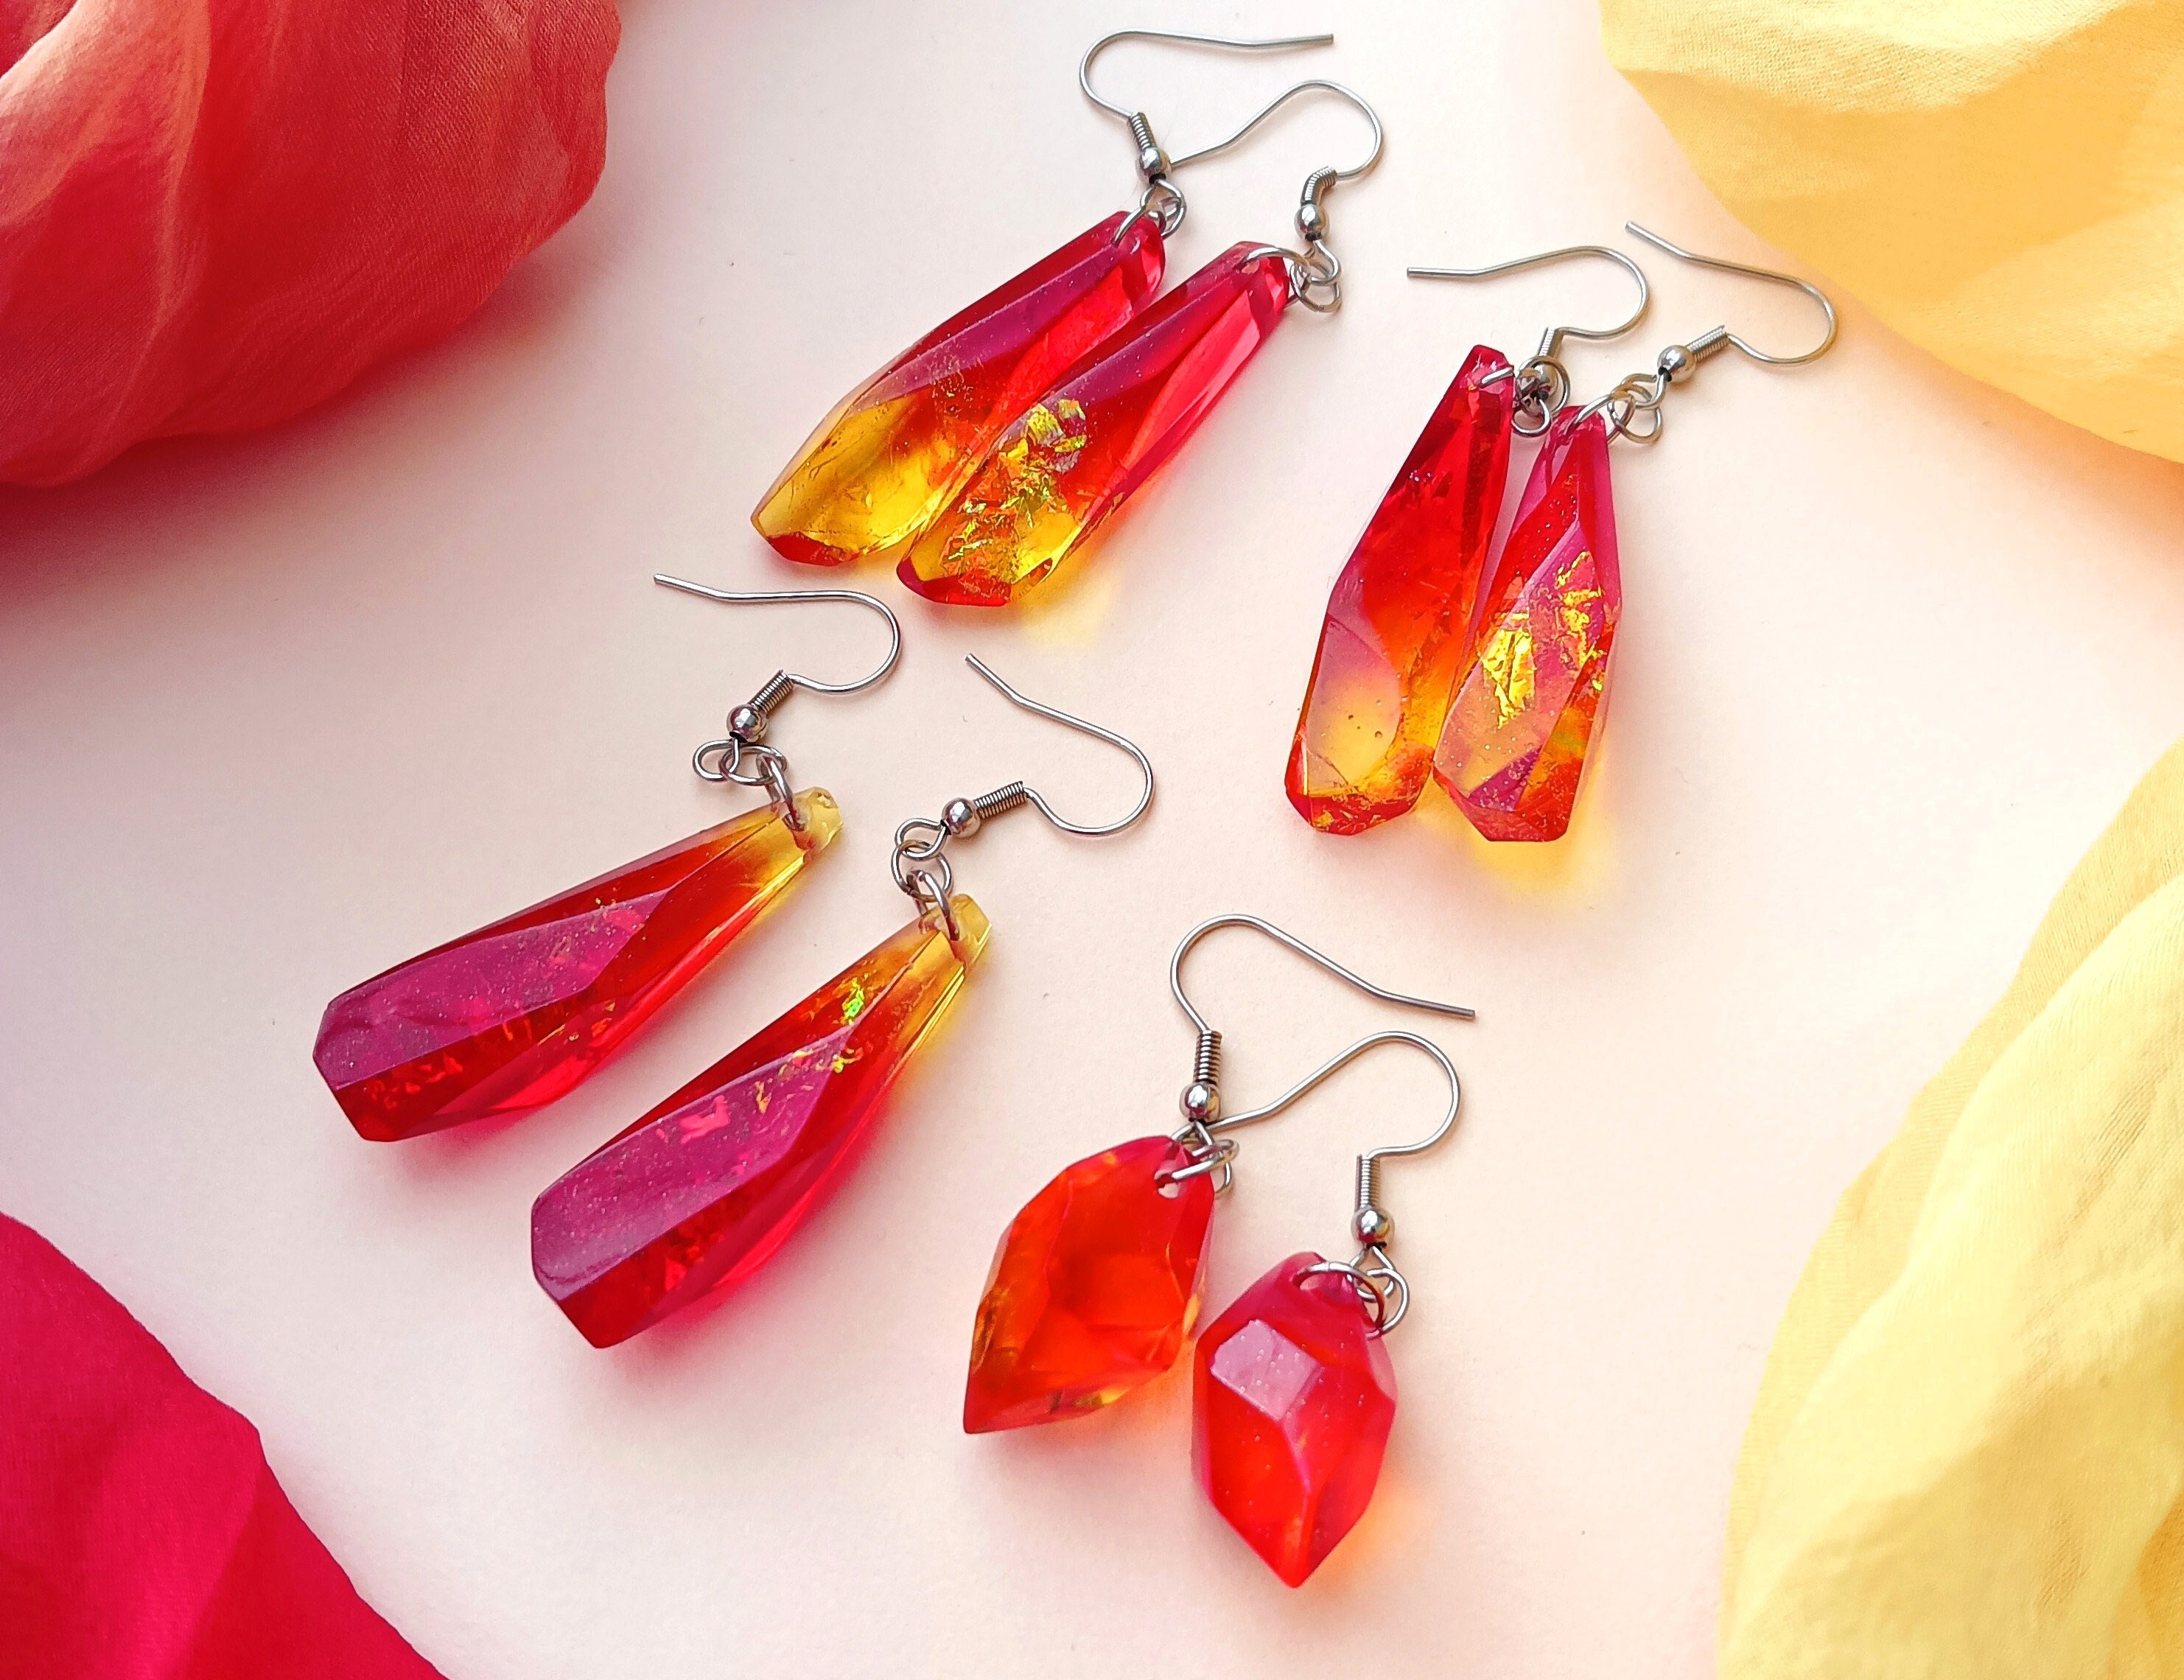 Share more than 195 red yellow earrings latest